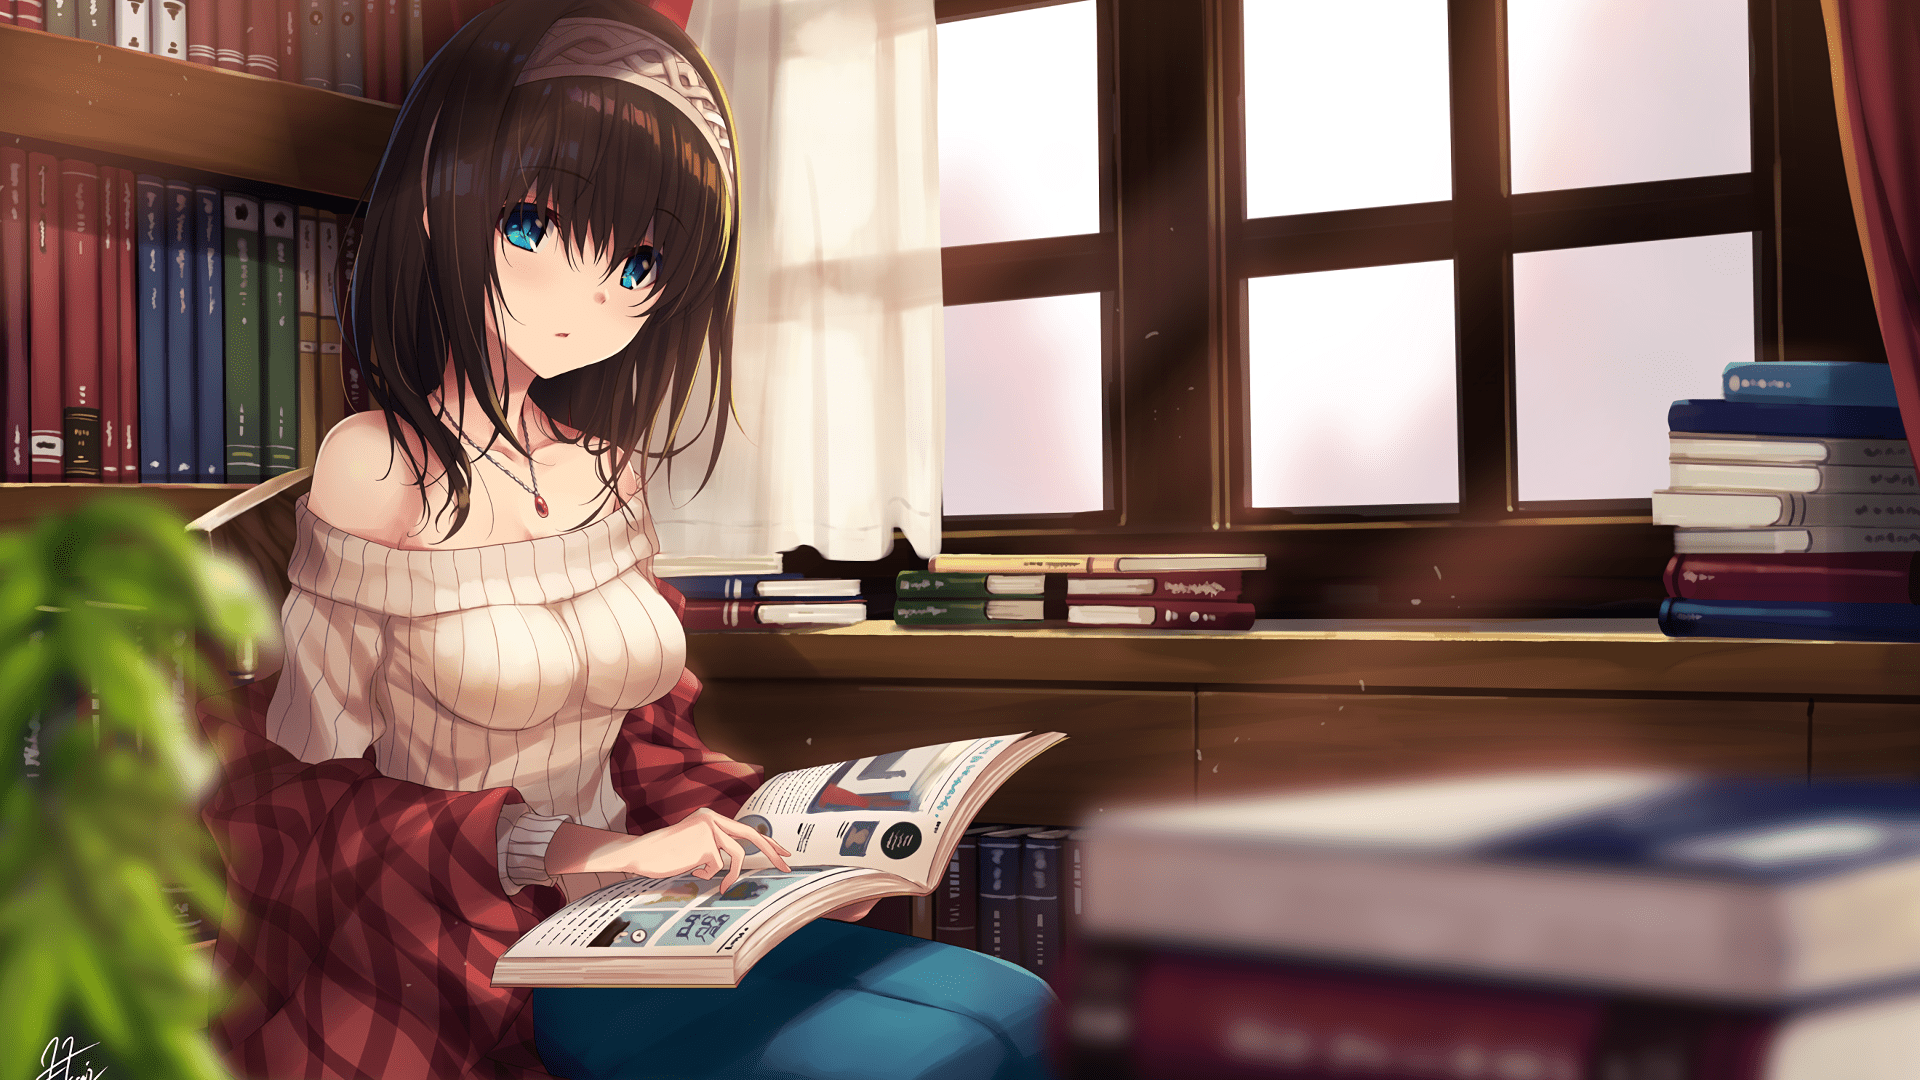 AI Art Generator Pretty anime girl studying on a bed